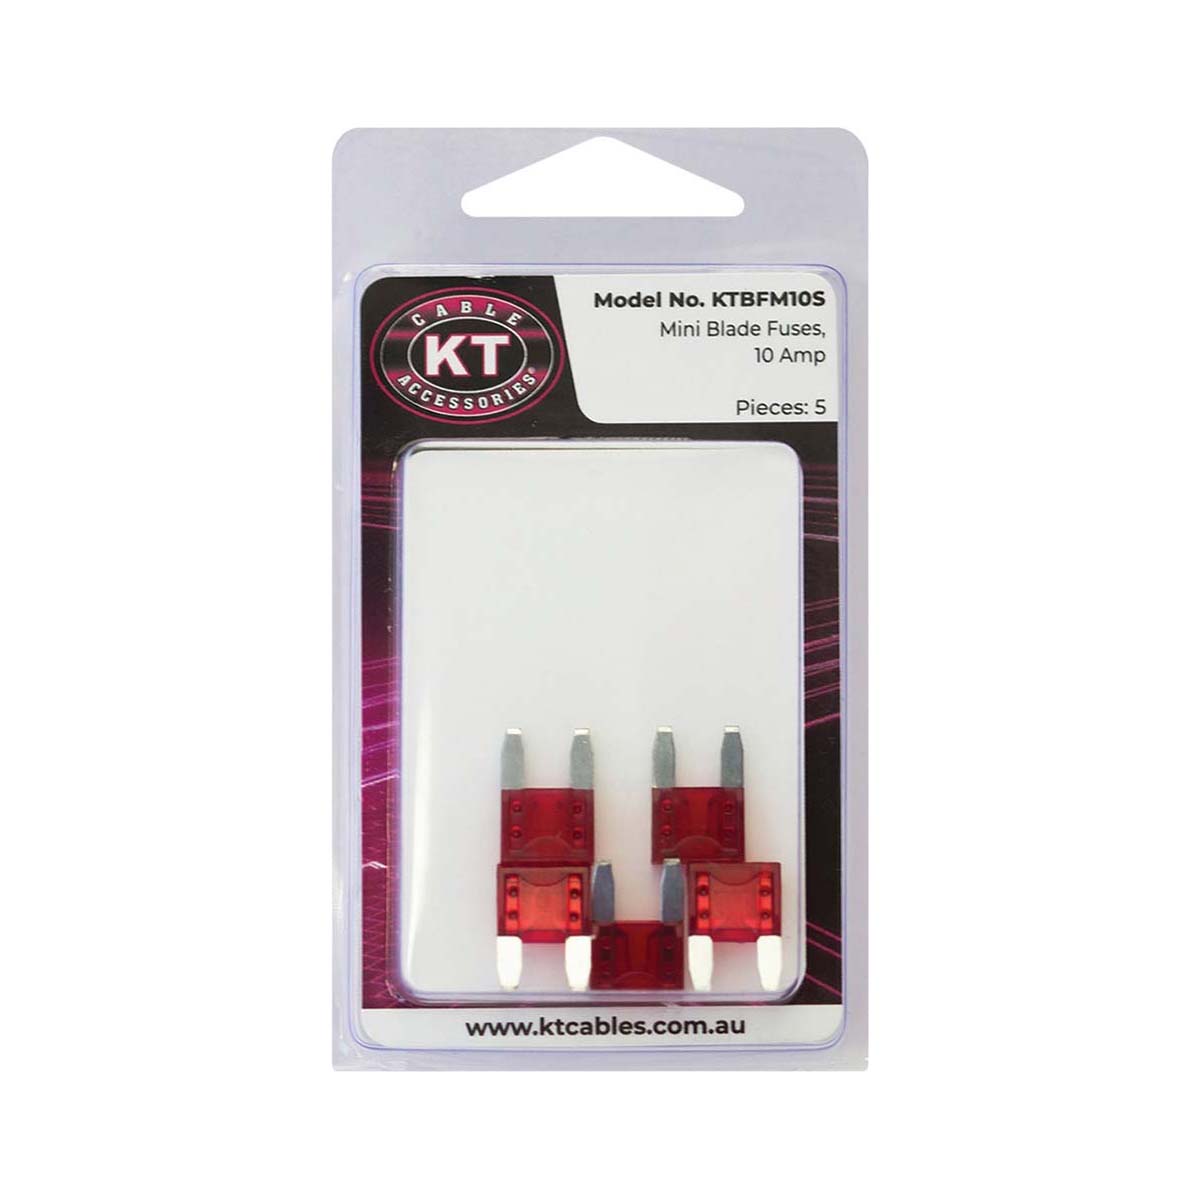 KT Cables Mini Blade Fuse 5 Pack 10amp